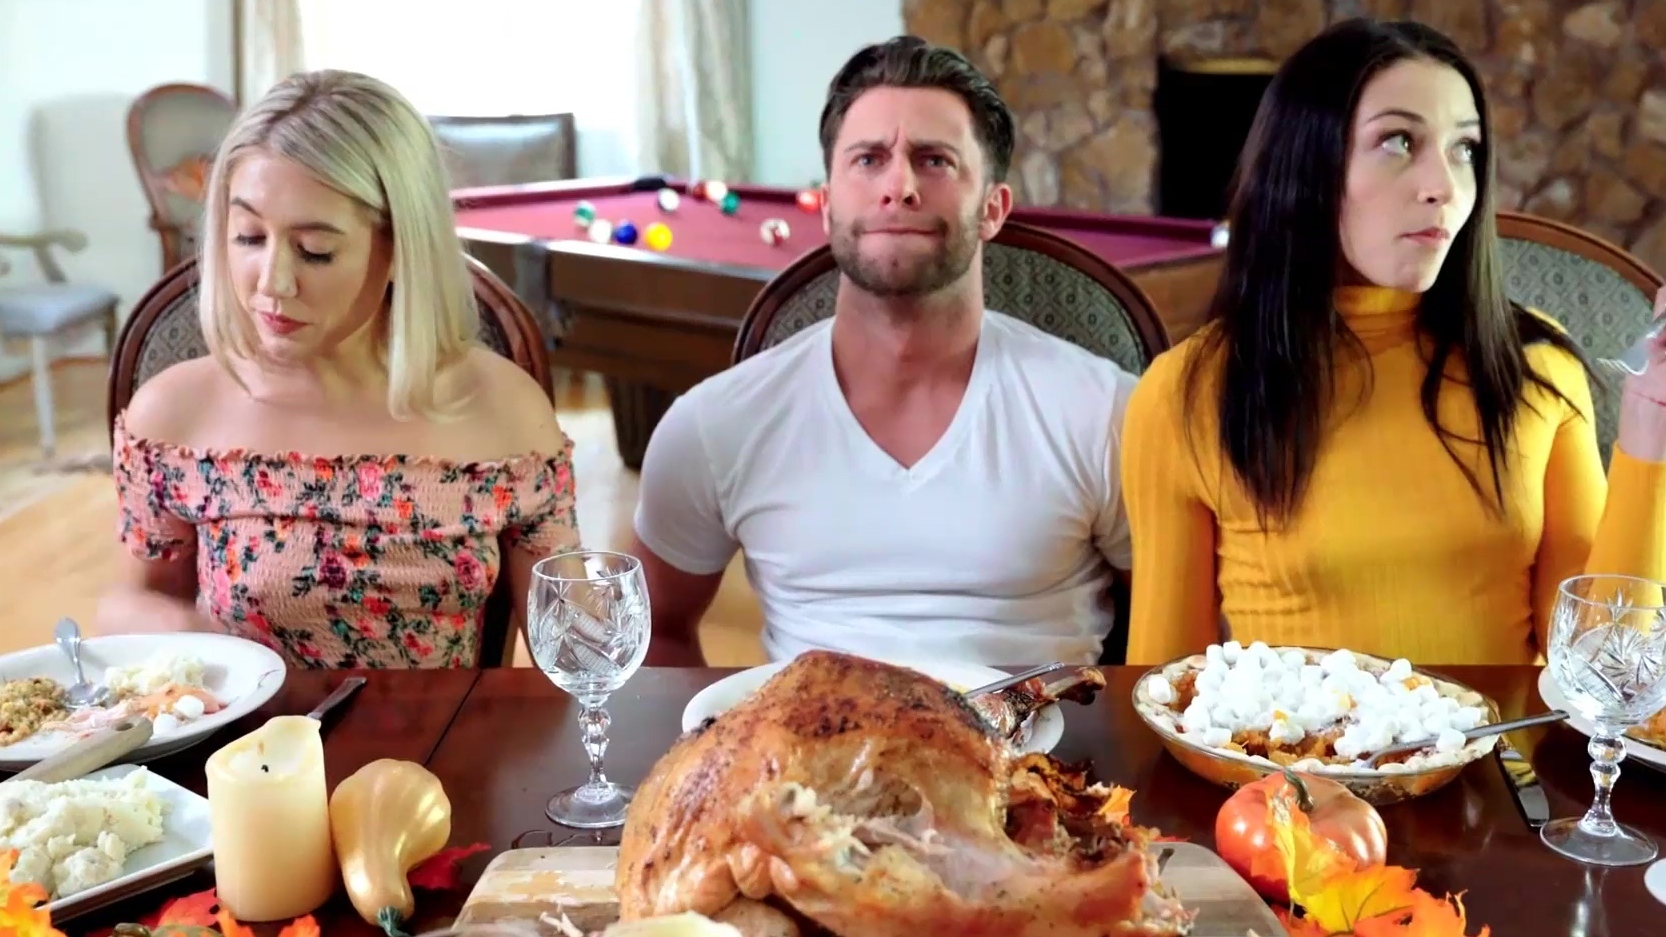 Wild handjob from brunette and blonde stepsisters during Thanksgiving dinner picture pic